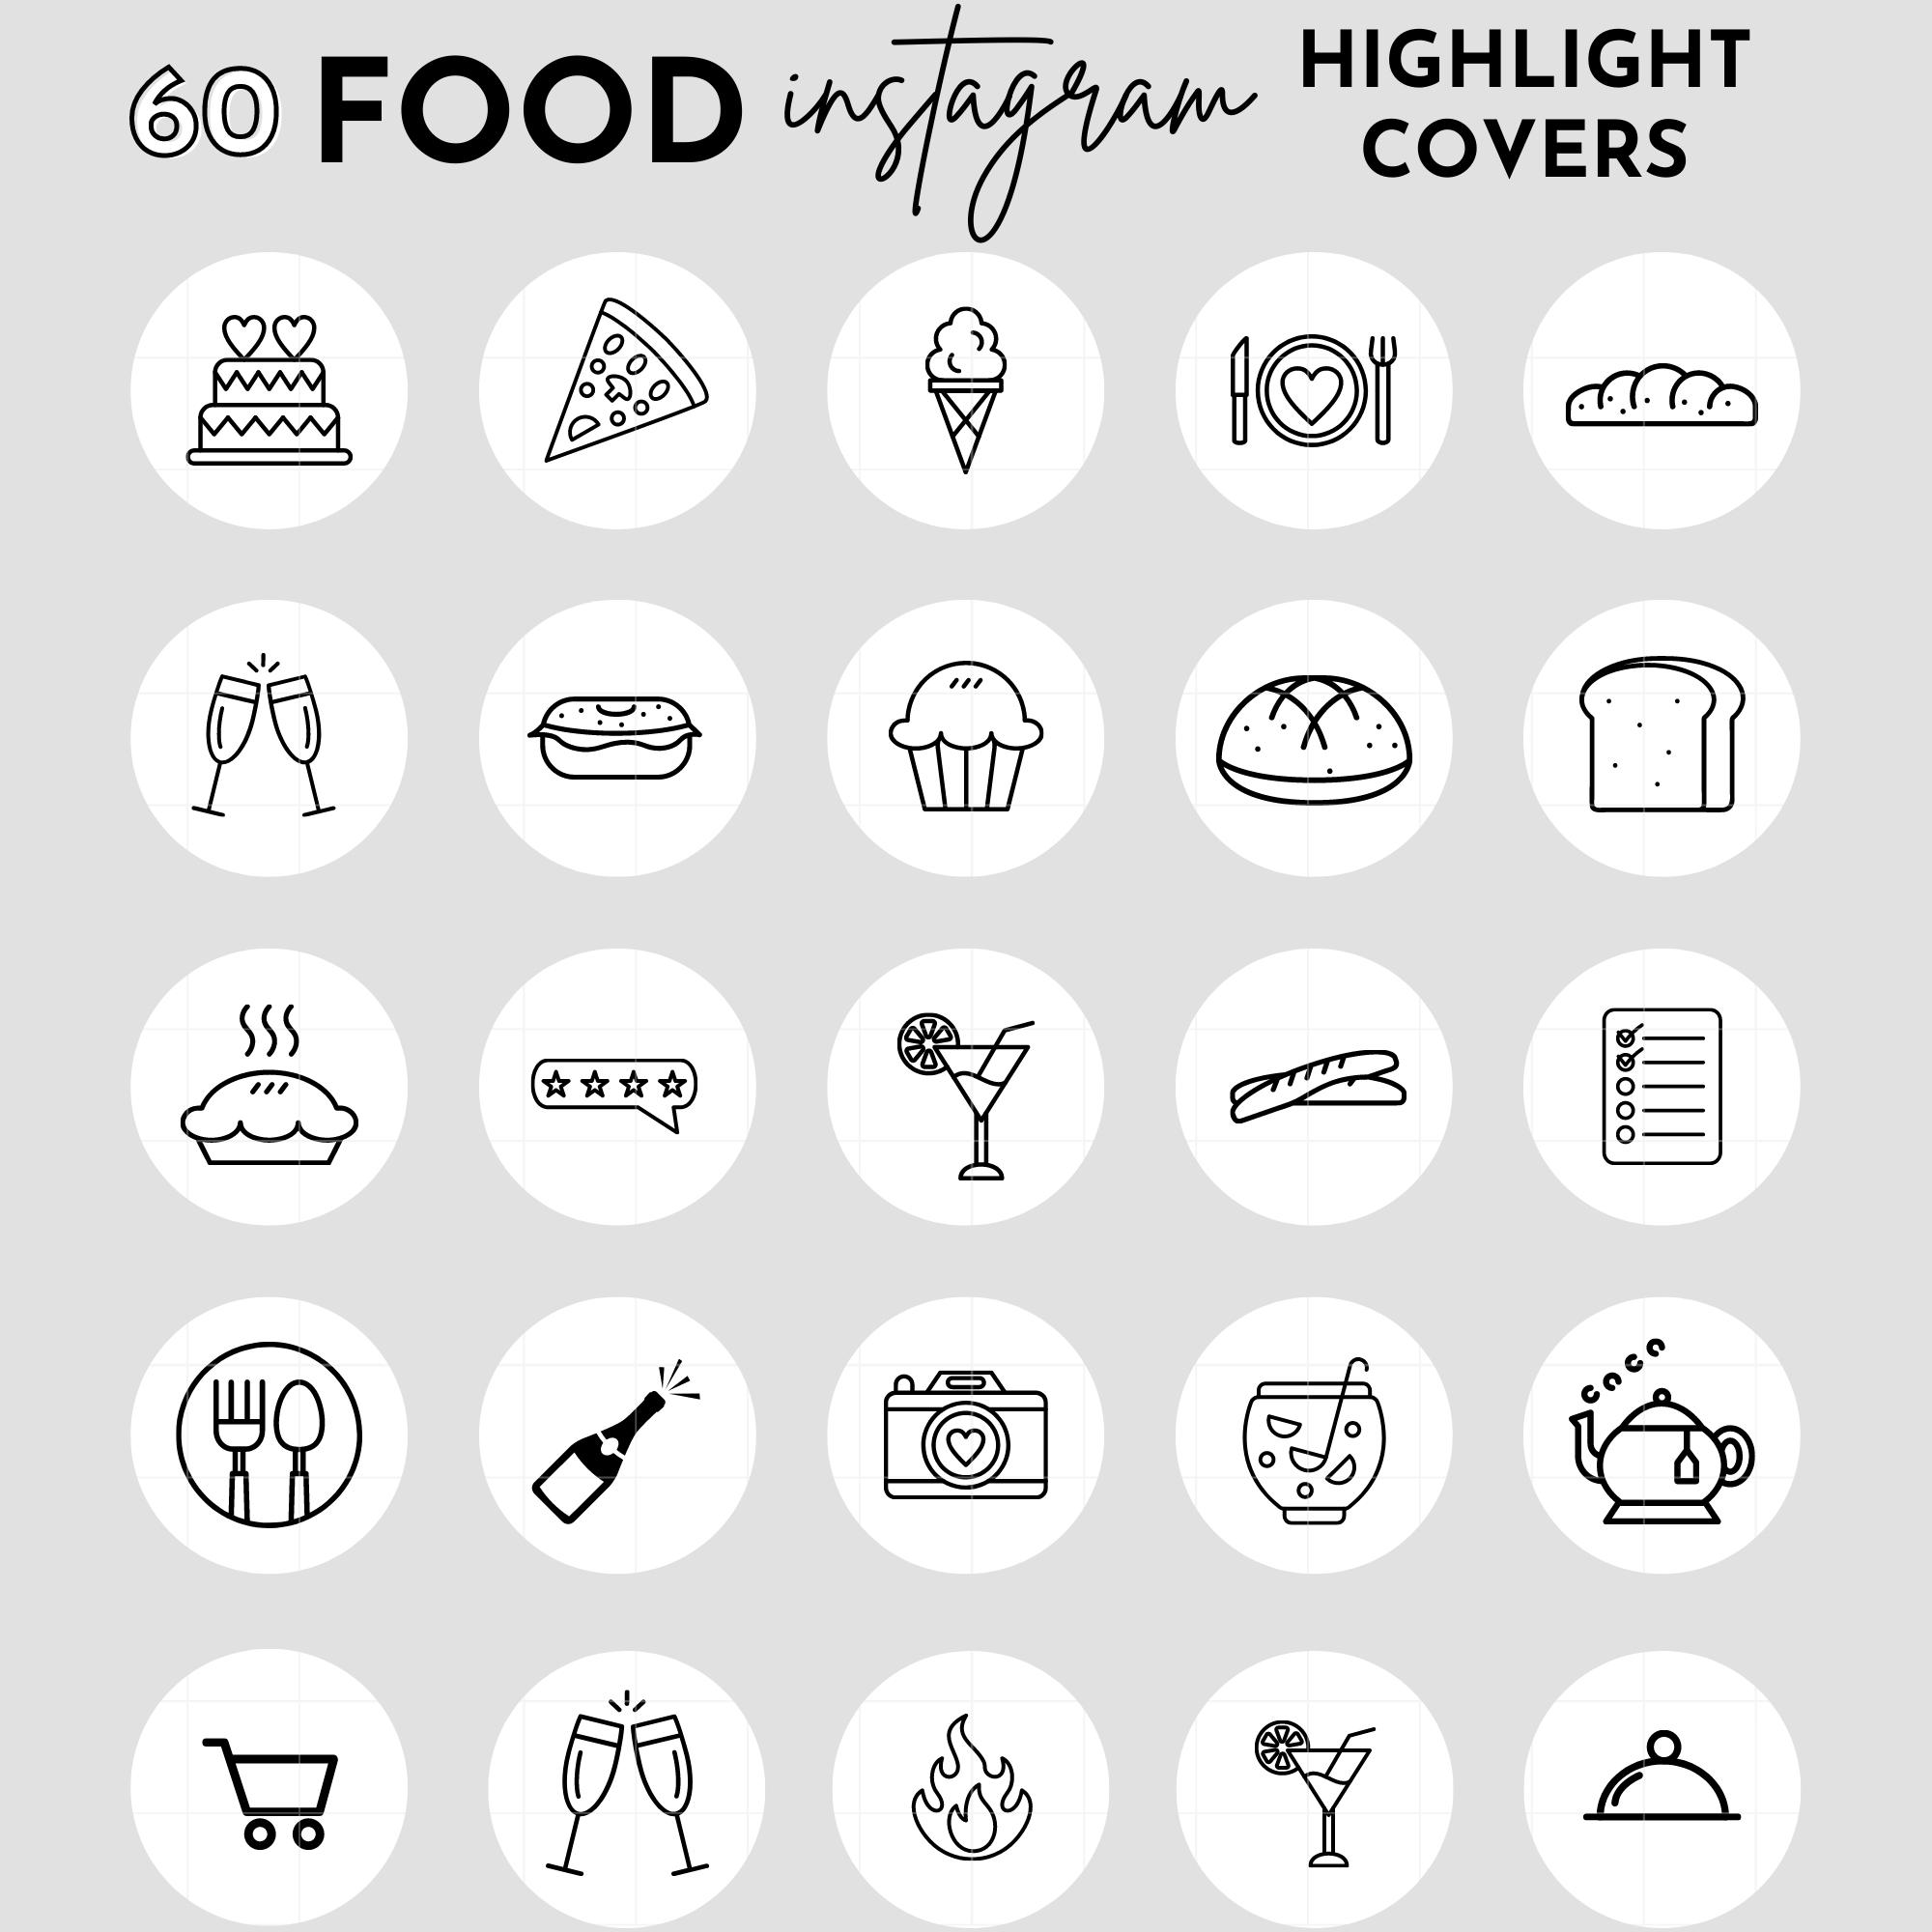 Food Instagram Highlight Cover Icons: \